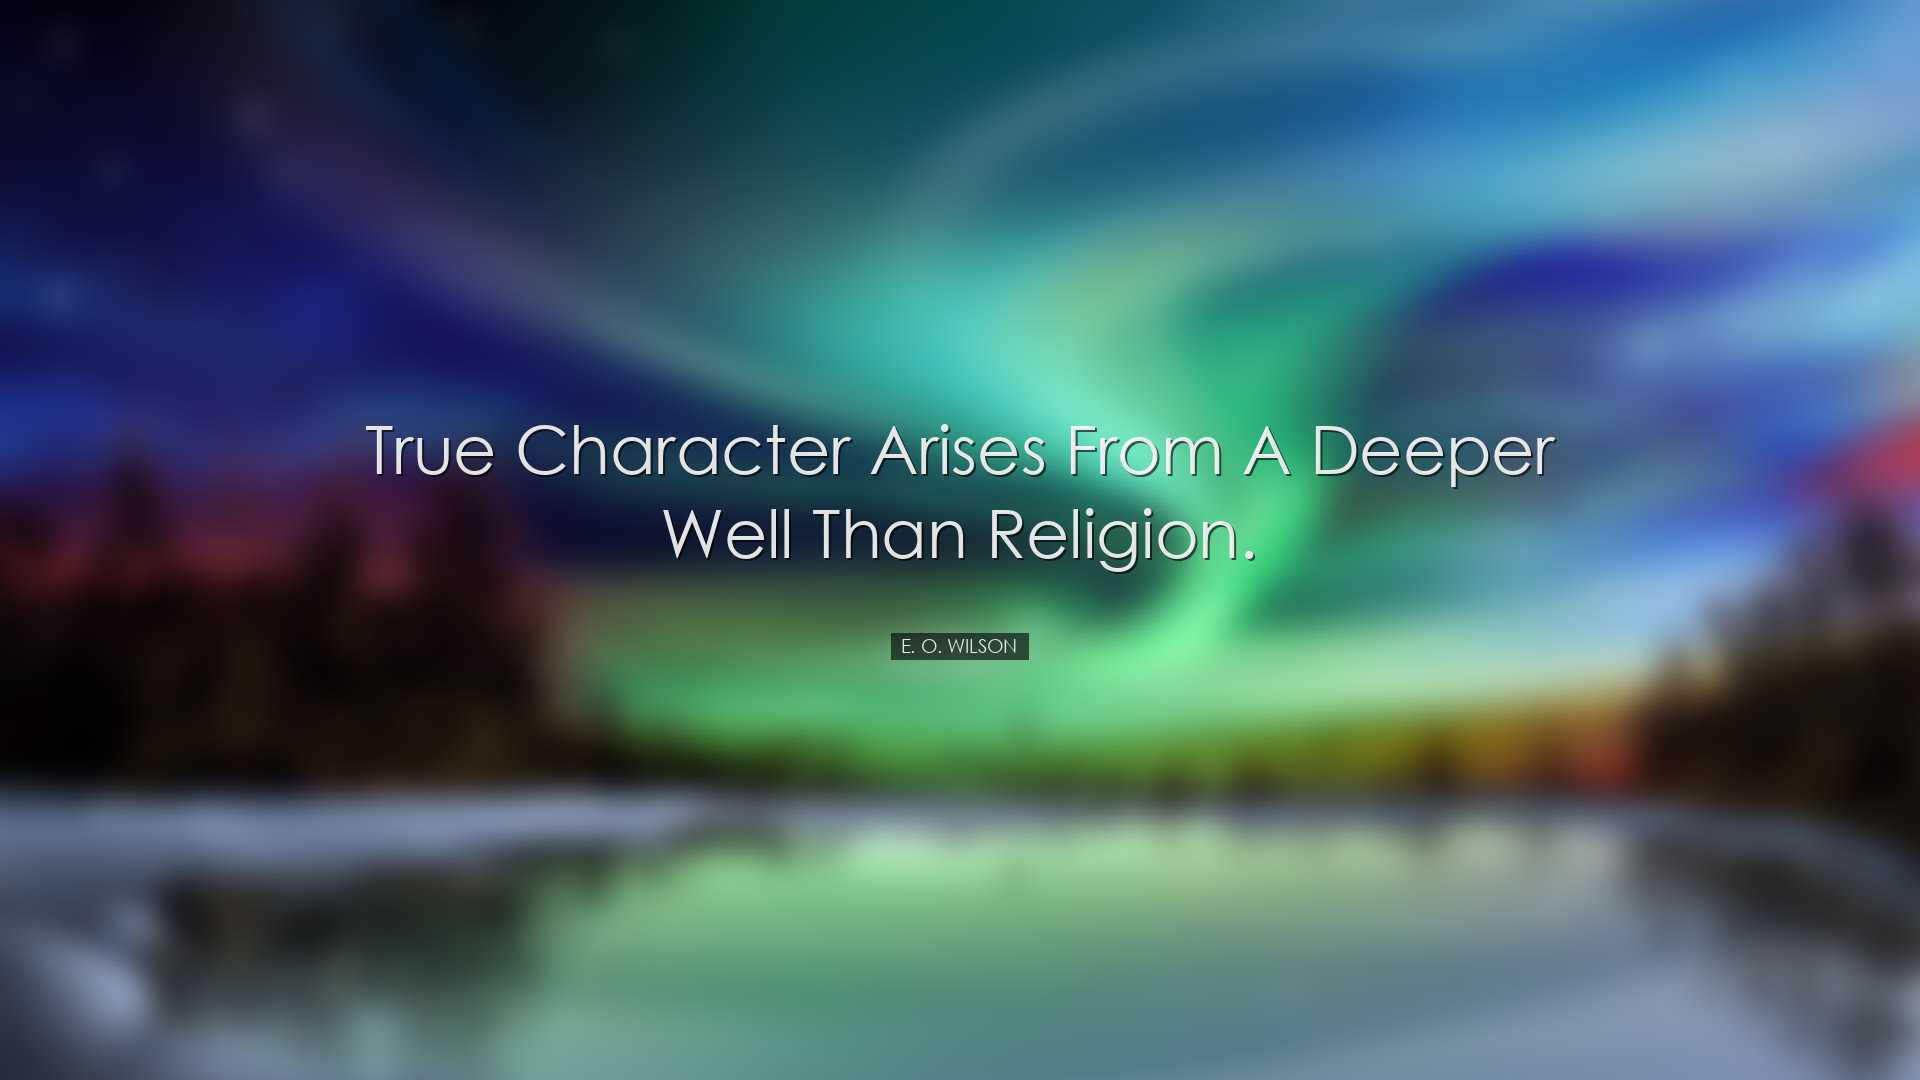 True character arises from a deeper well than religion. - E. O. Wi